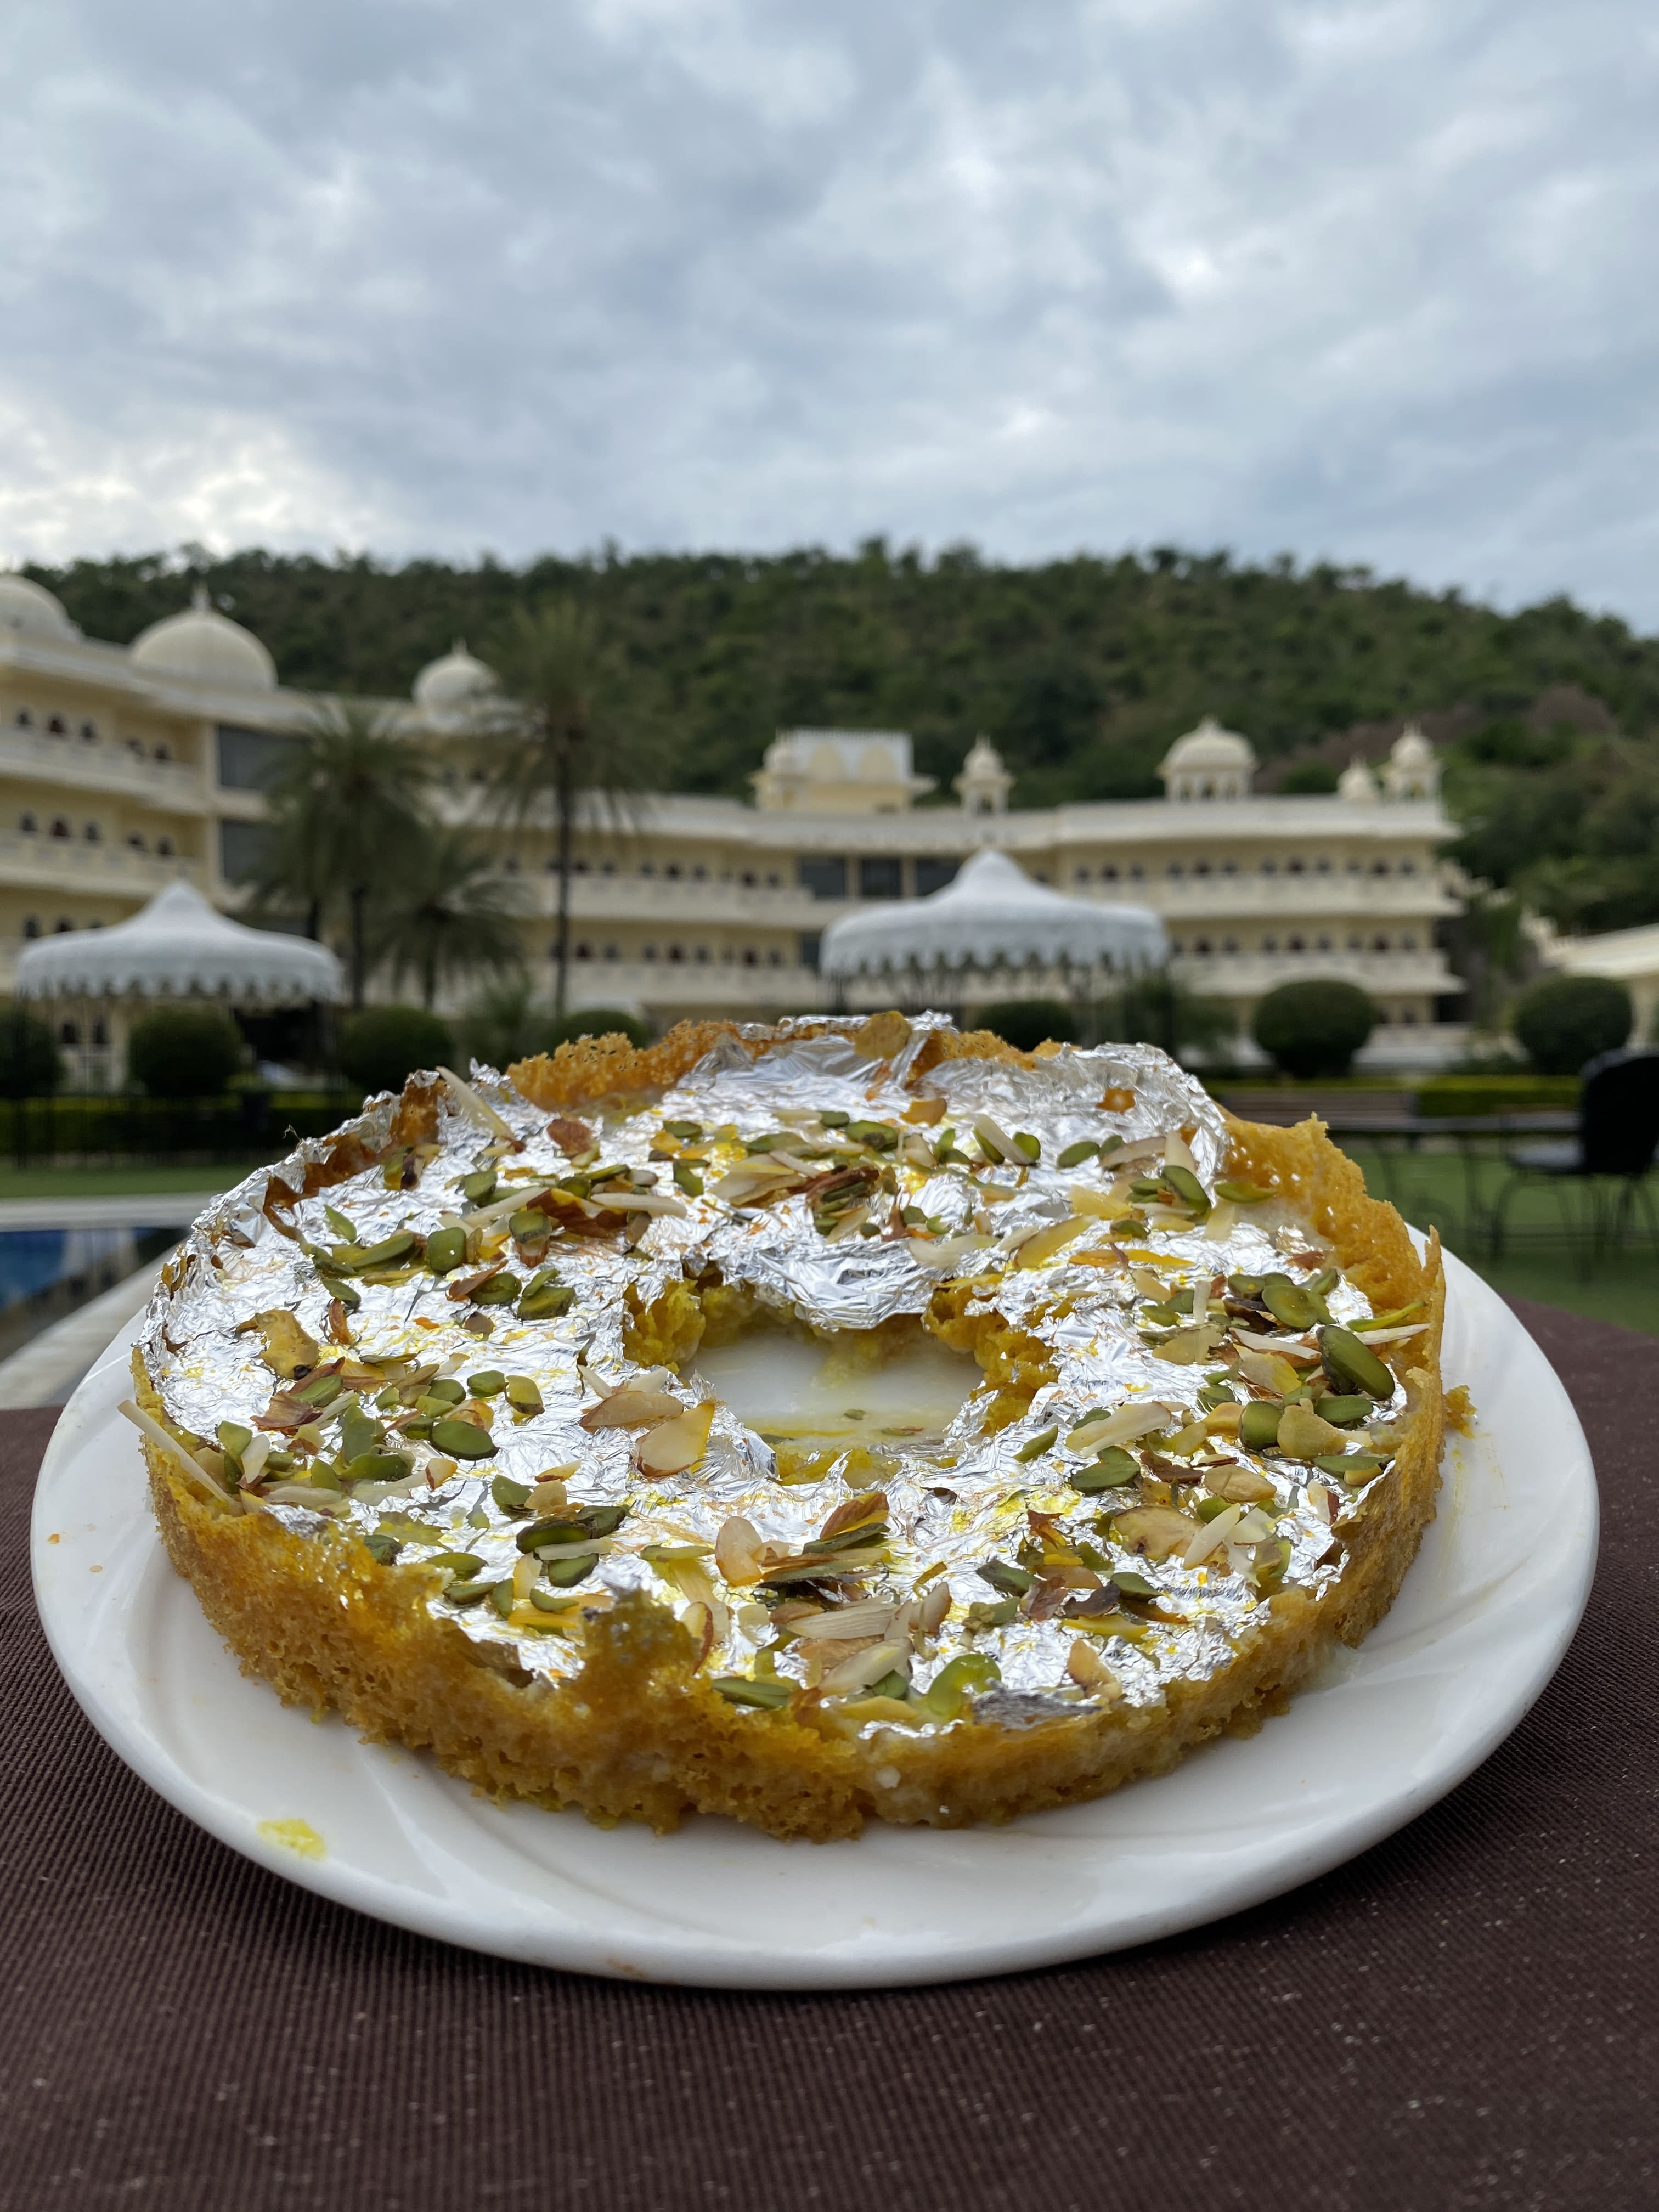 Labh Garh Palace Dining | hotels for dining on Udaipur Jaipur highway | resorts for dining on Udaipur Jaipur highway